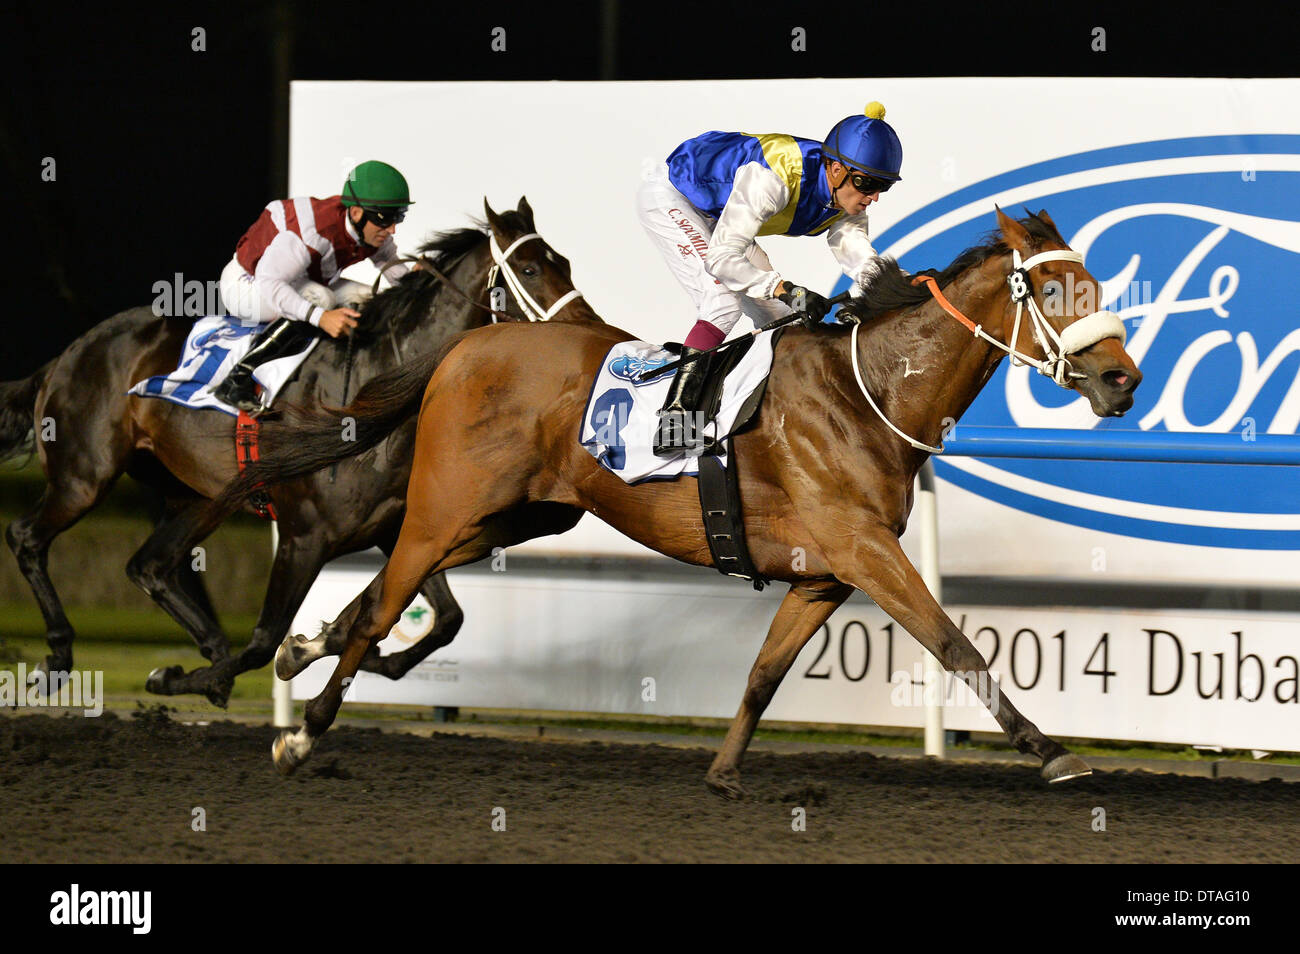 DUBAI, UAE, 13th Feb 2014. Sanshaawes ridden by Christophe Soumillon wins the Ford F-150 Raptor Trophy at the Meydan race track. The horse is trained by M de Kock Credit:  Feroz Khan/Alamy Live News Stock Photo